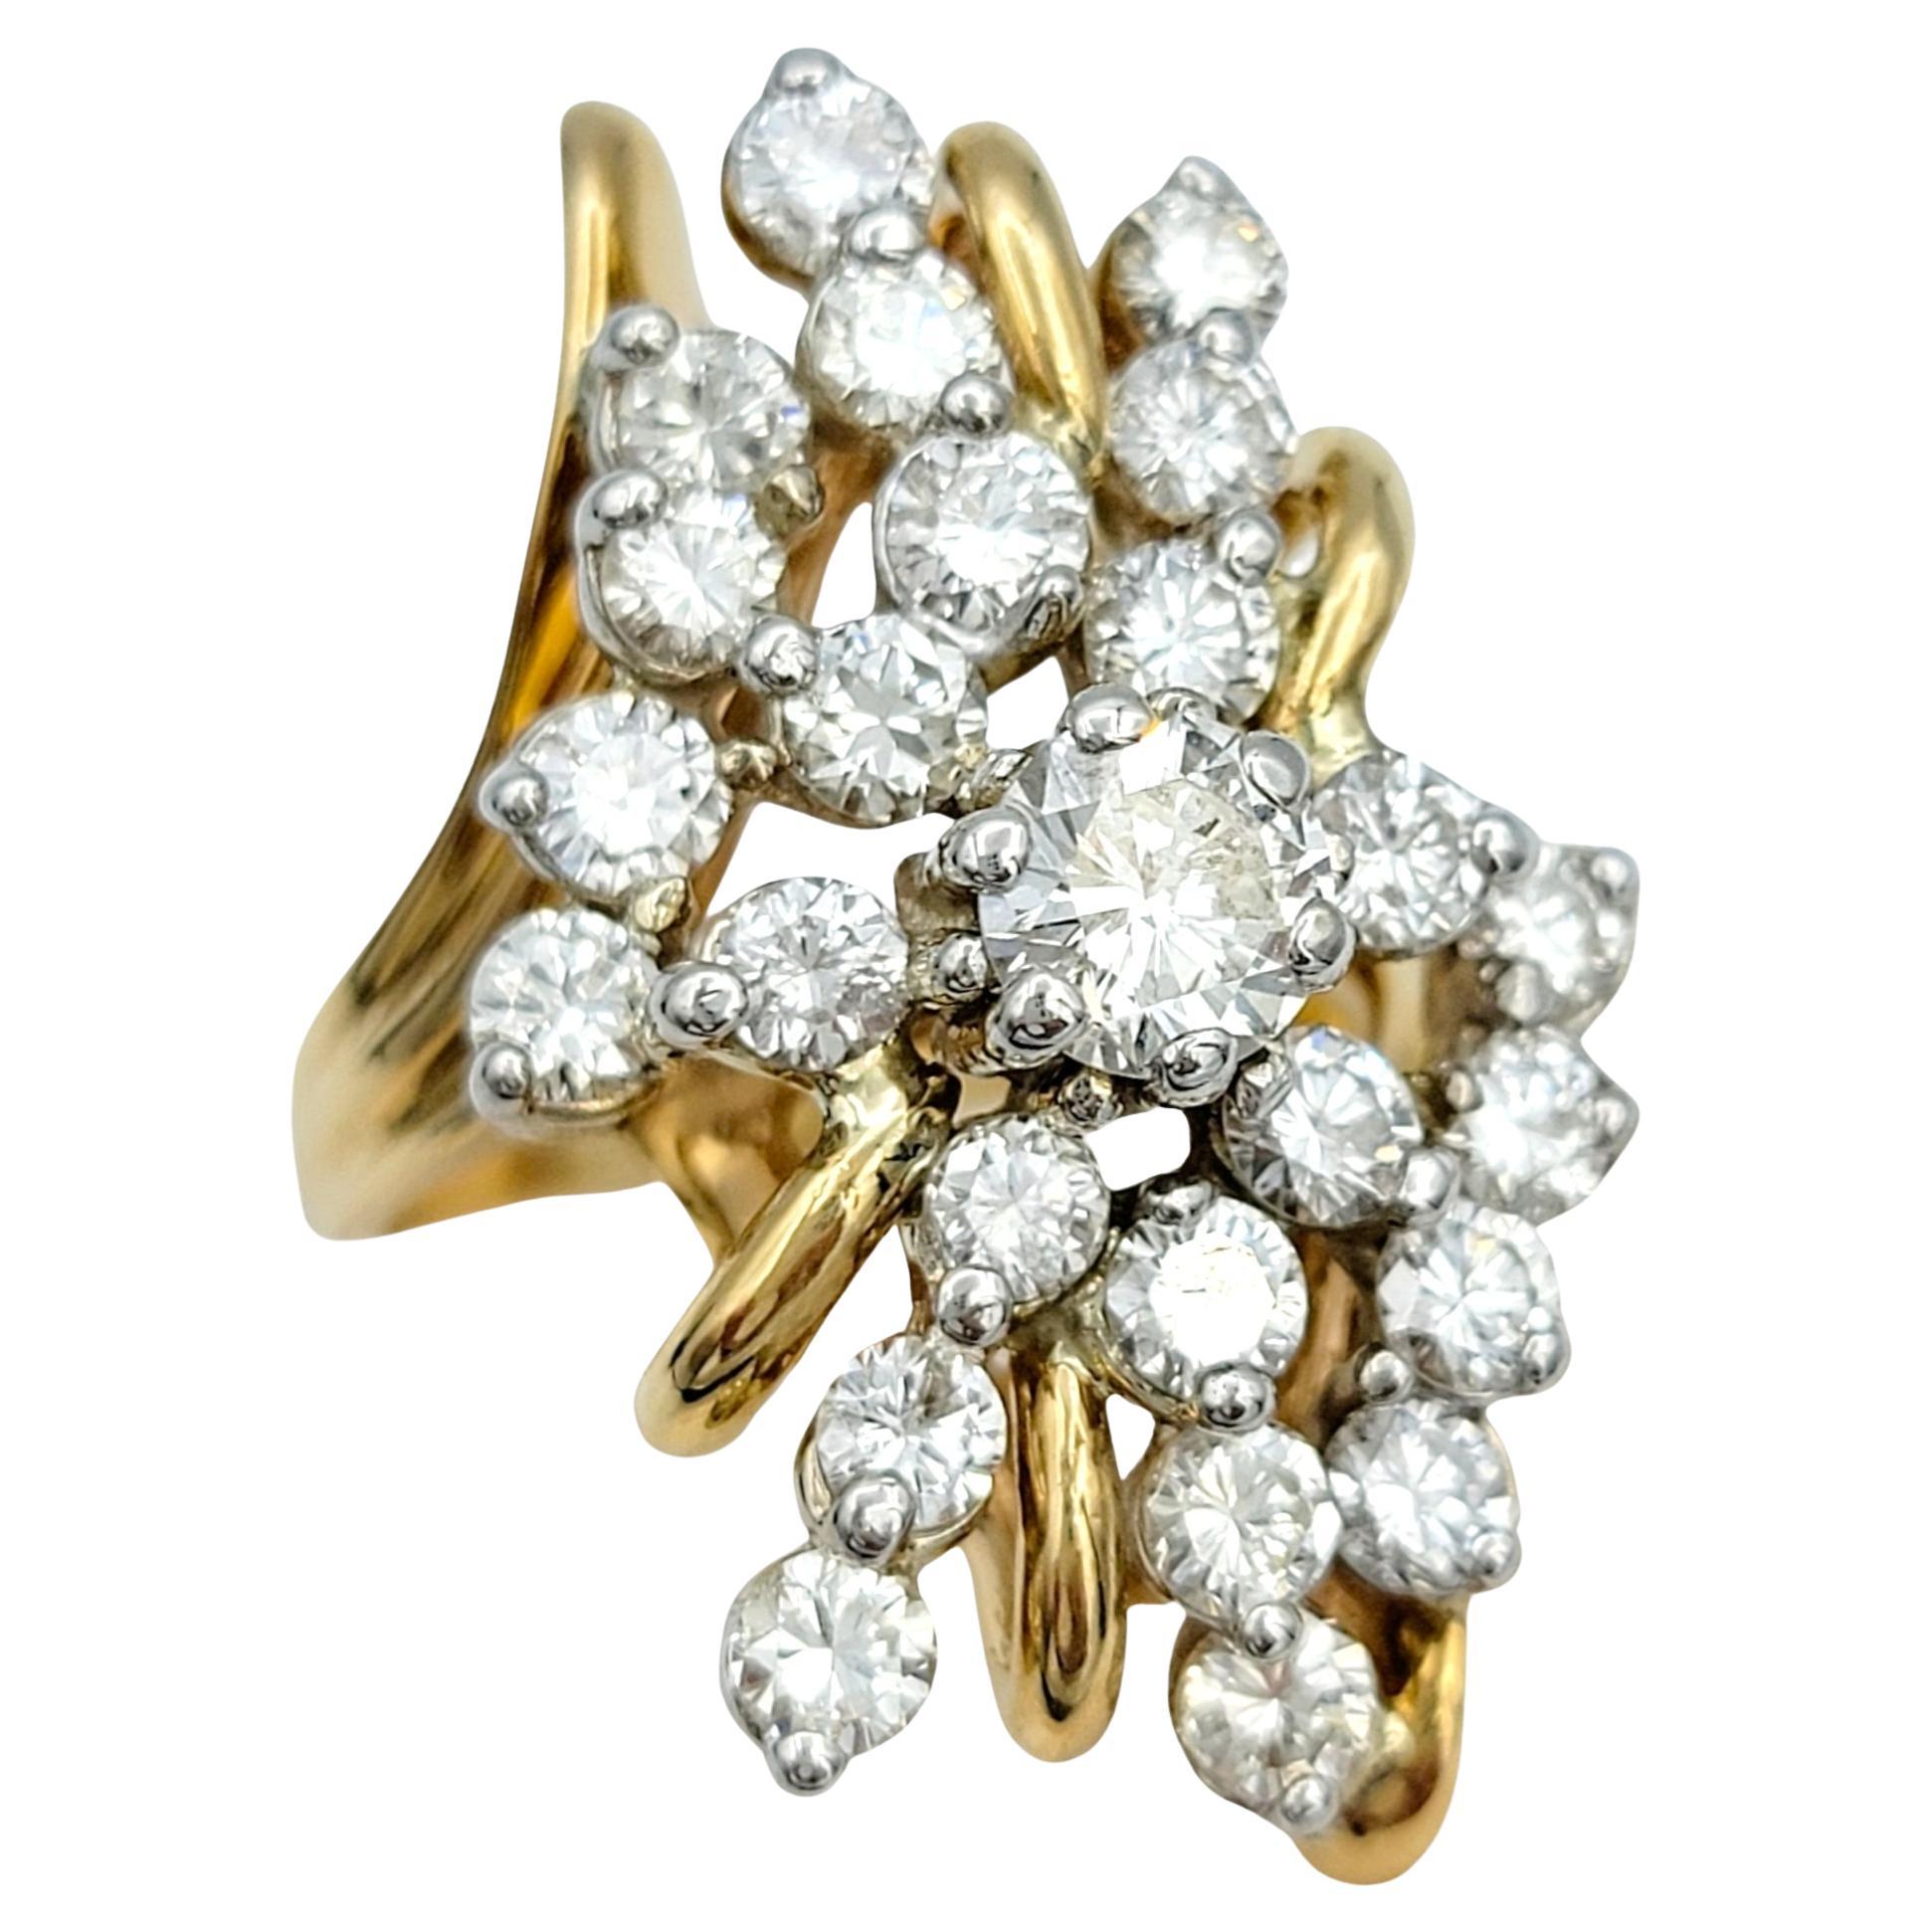 3.01 Carat Total Round Diamond Elongated Cluster Ring in 14 Karat Yellow Gold For Sale